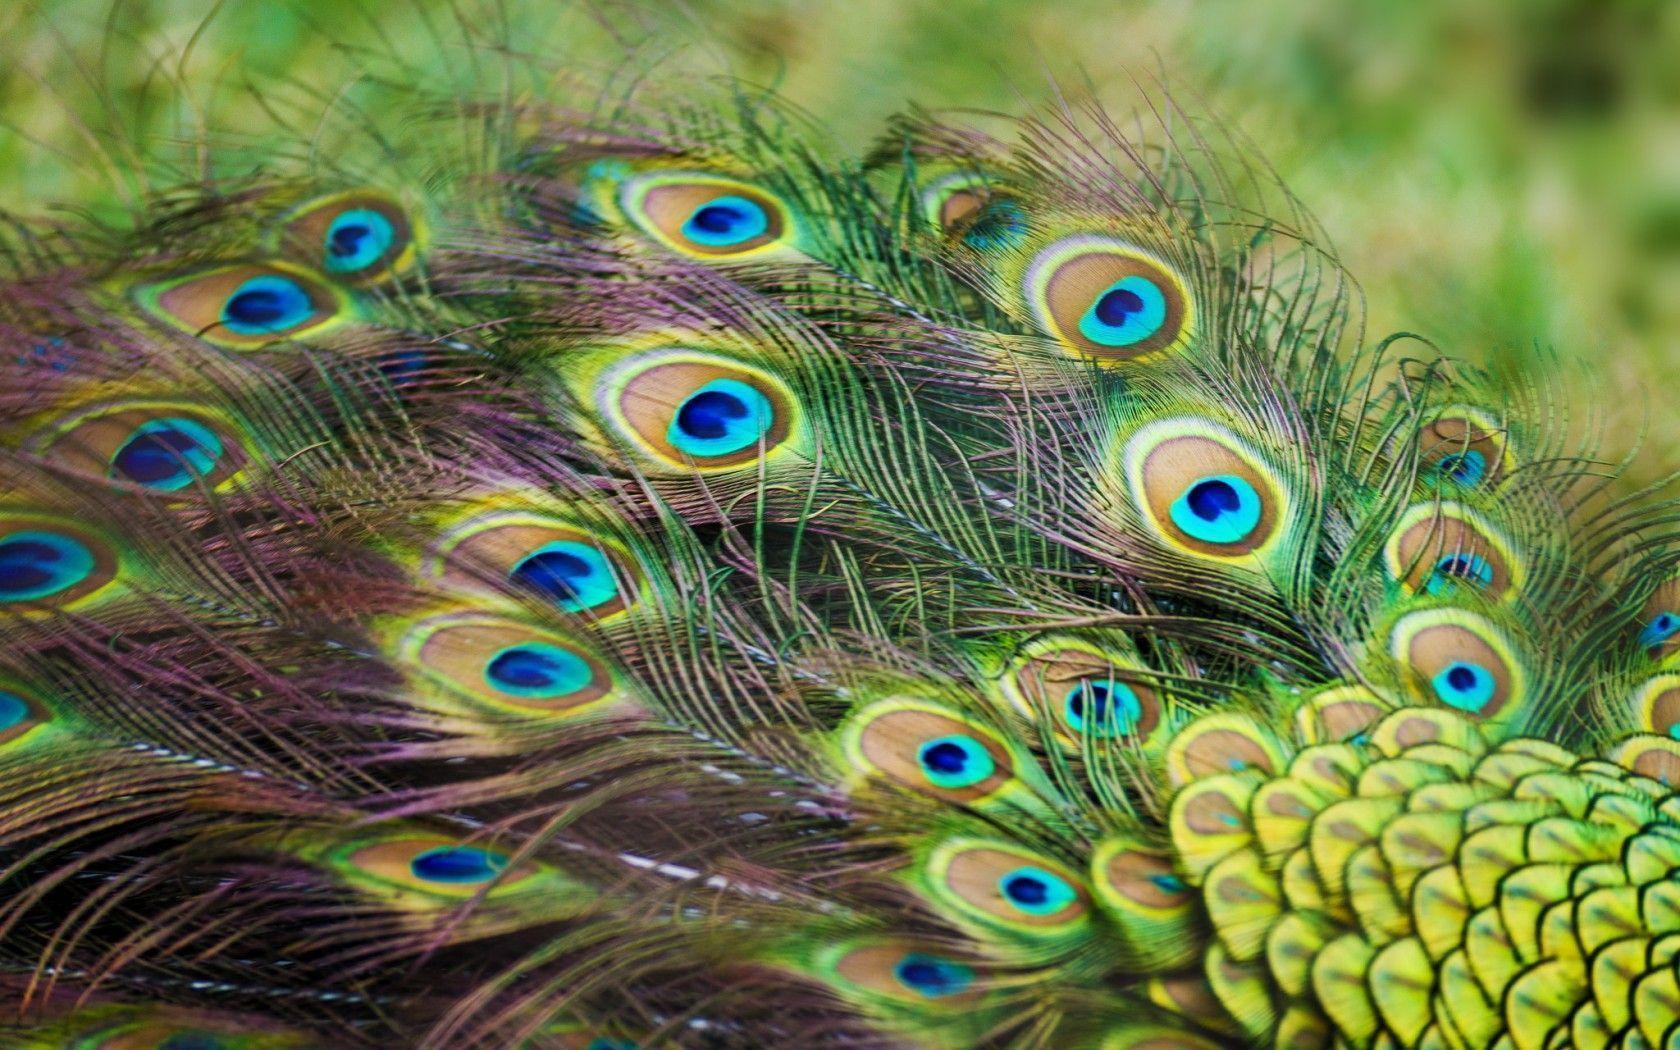 Peacock Feather Wallpaper Uk ~ Wallpaper: Peacock Feathers Wallpapers ...